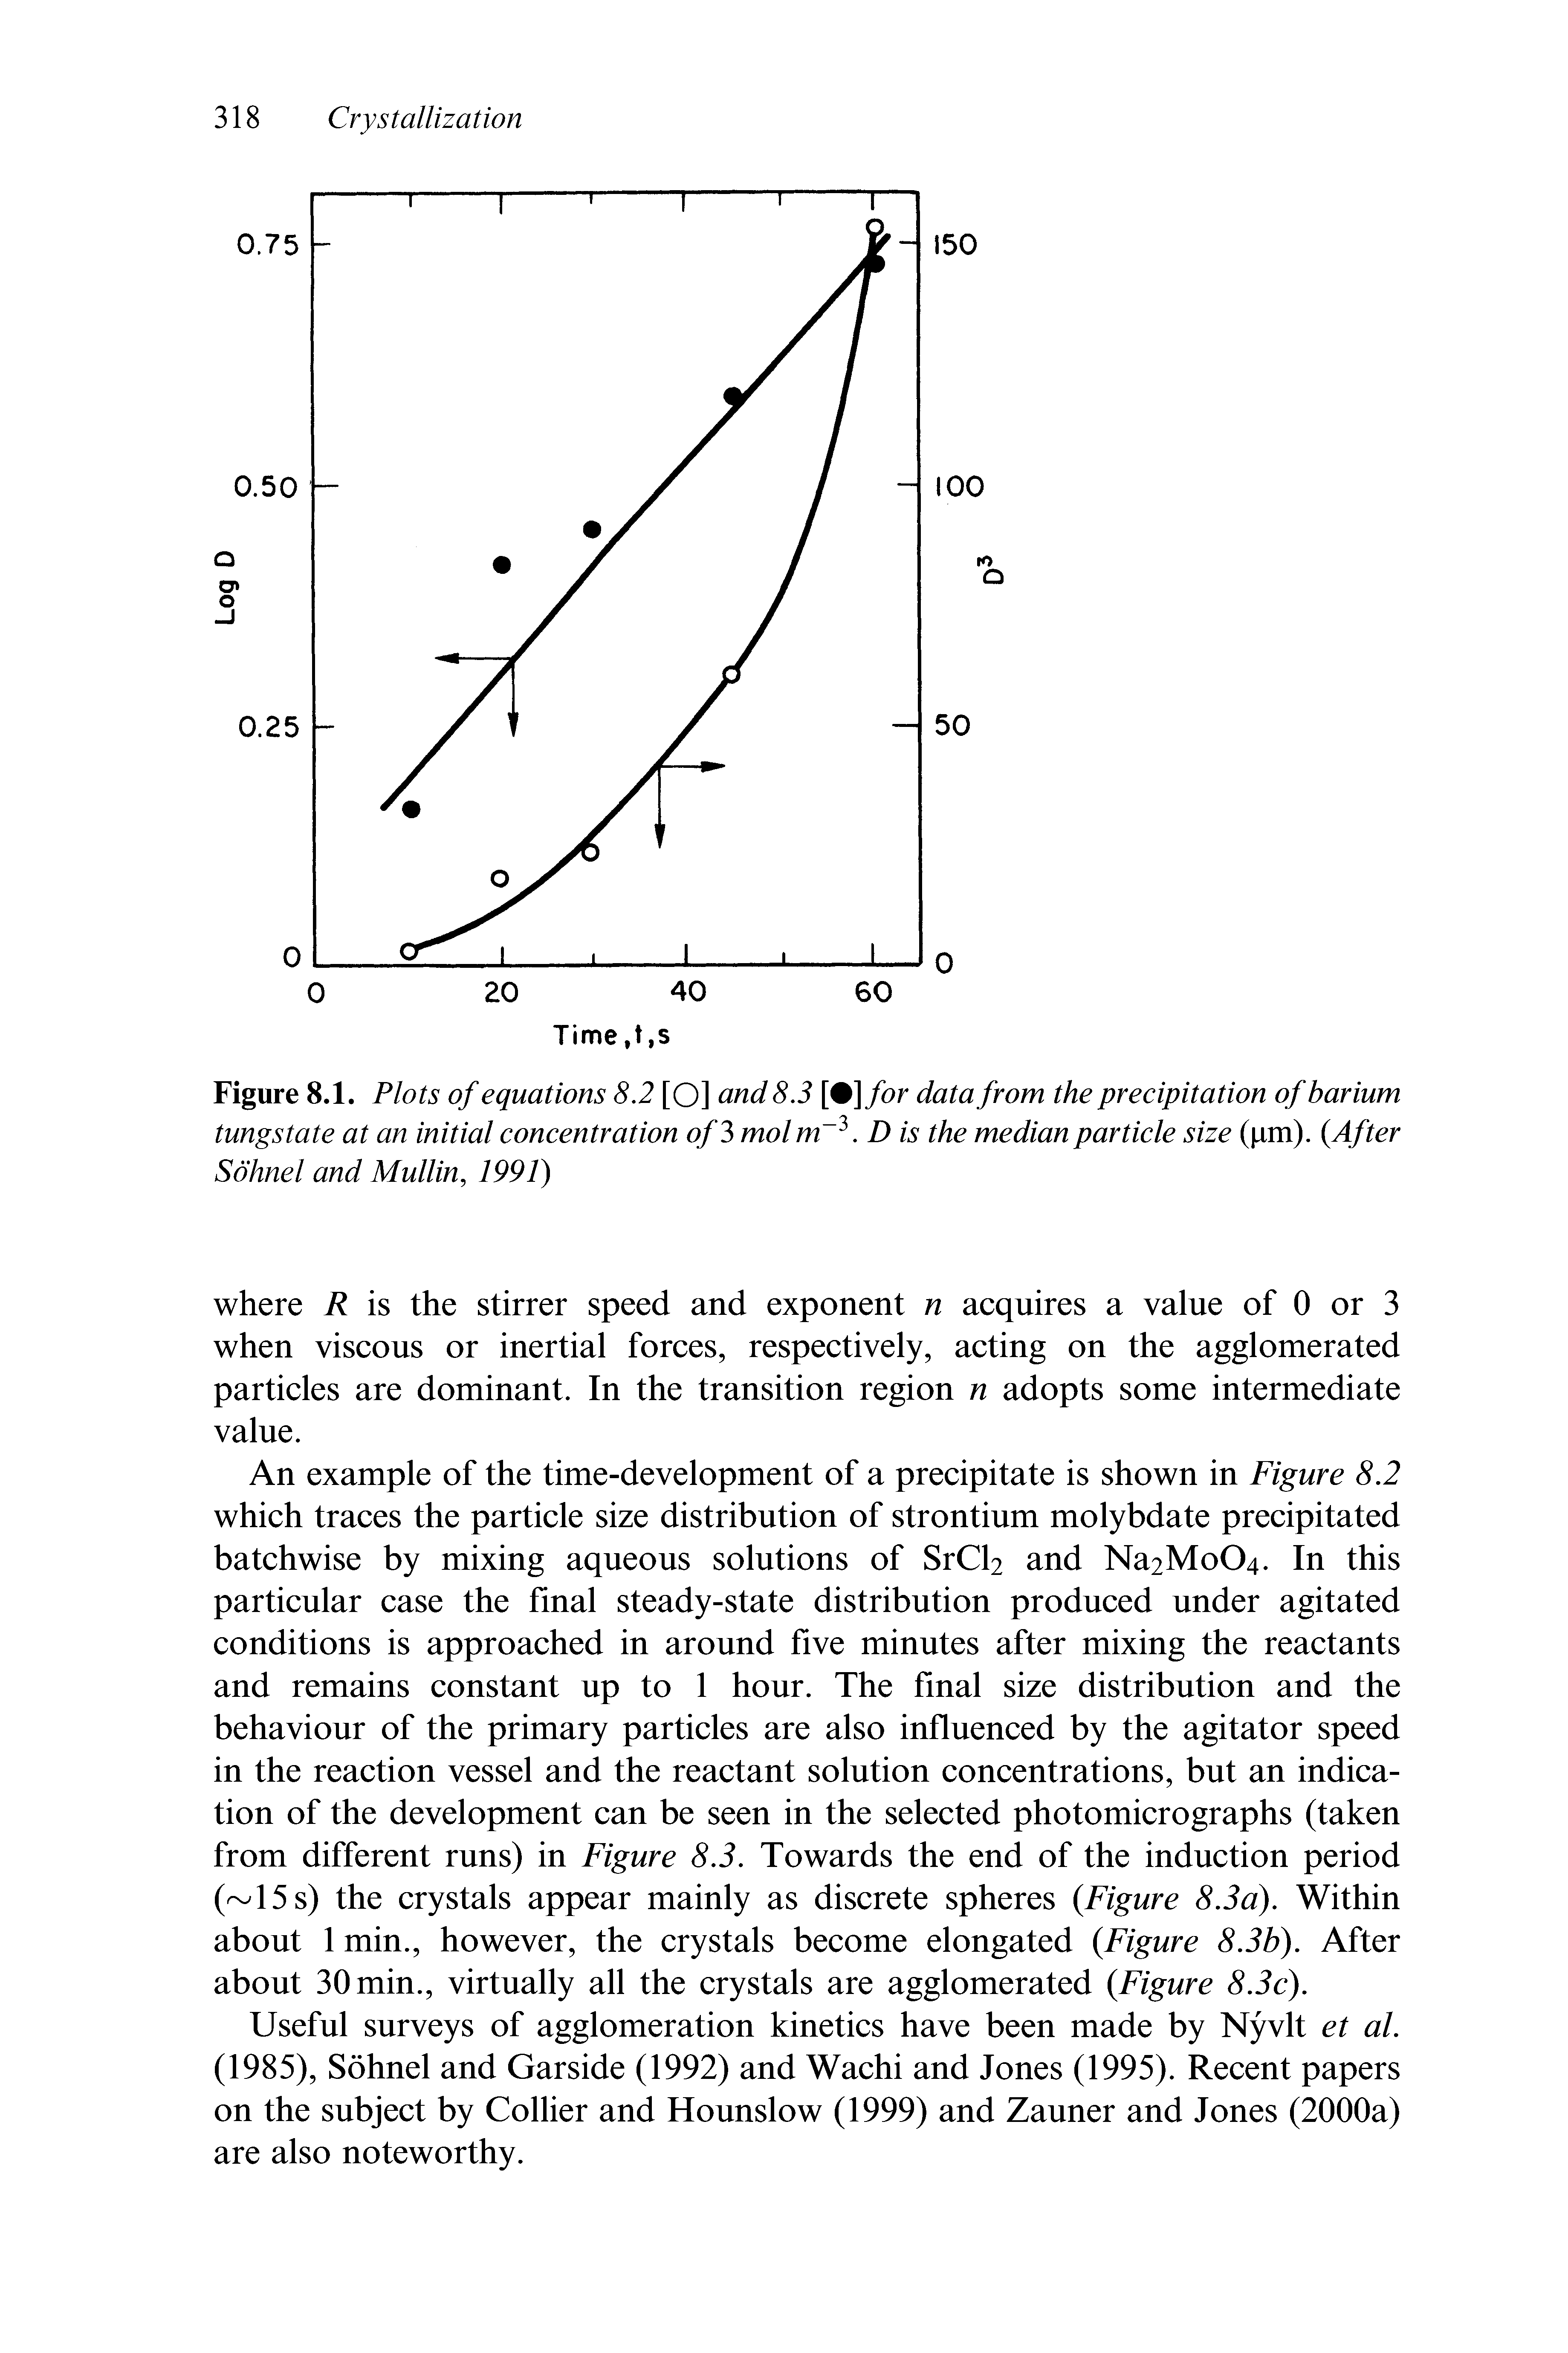 Figure 8.1. Plots of equations 8.2 [O] and 8.3 [%]for data from the precipitation of barium tungstate at an initial concentration of 3 mol m. D is the median particle size ( am). After Sdhnel and Mullin, 1991)...